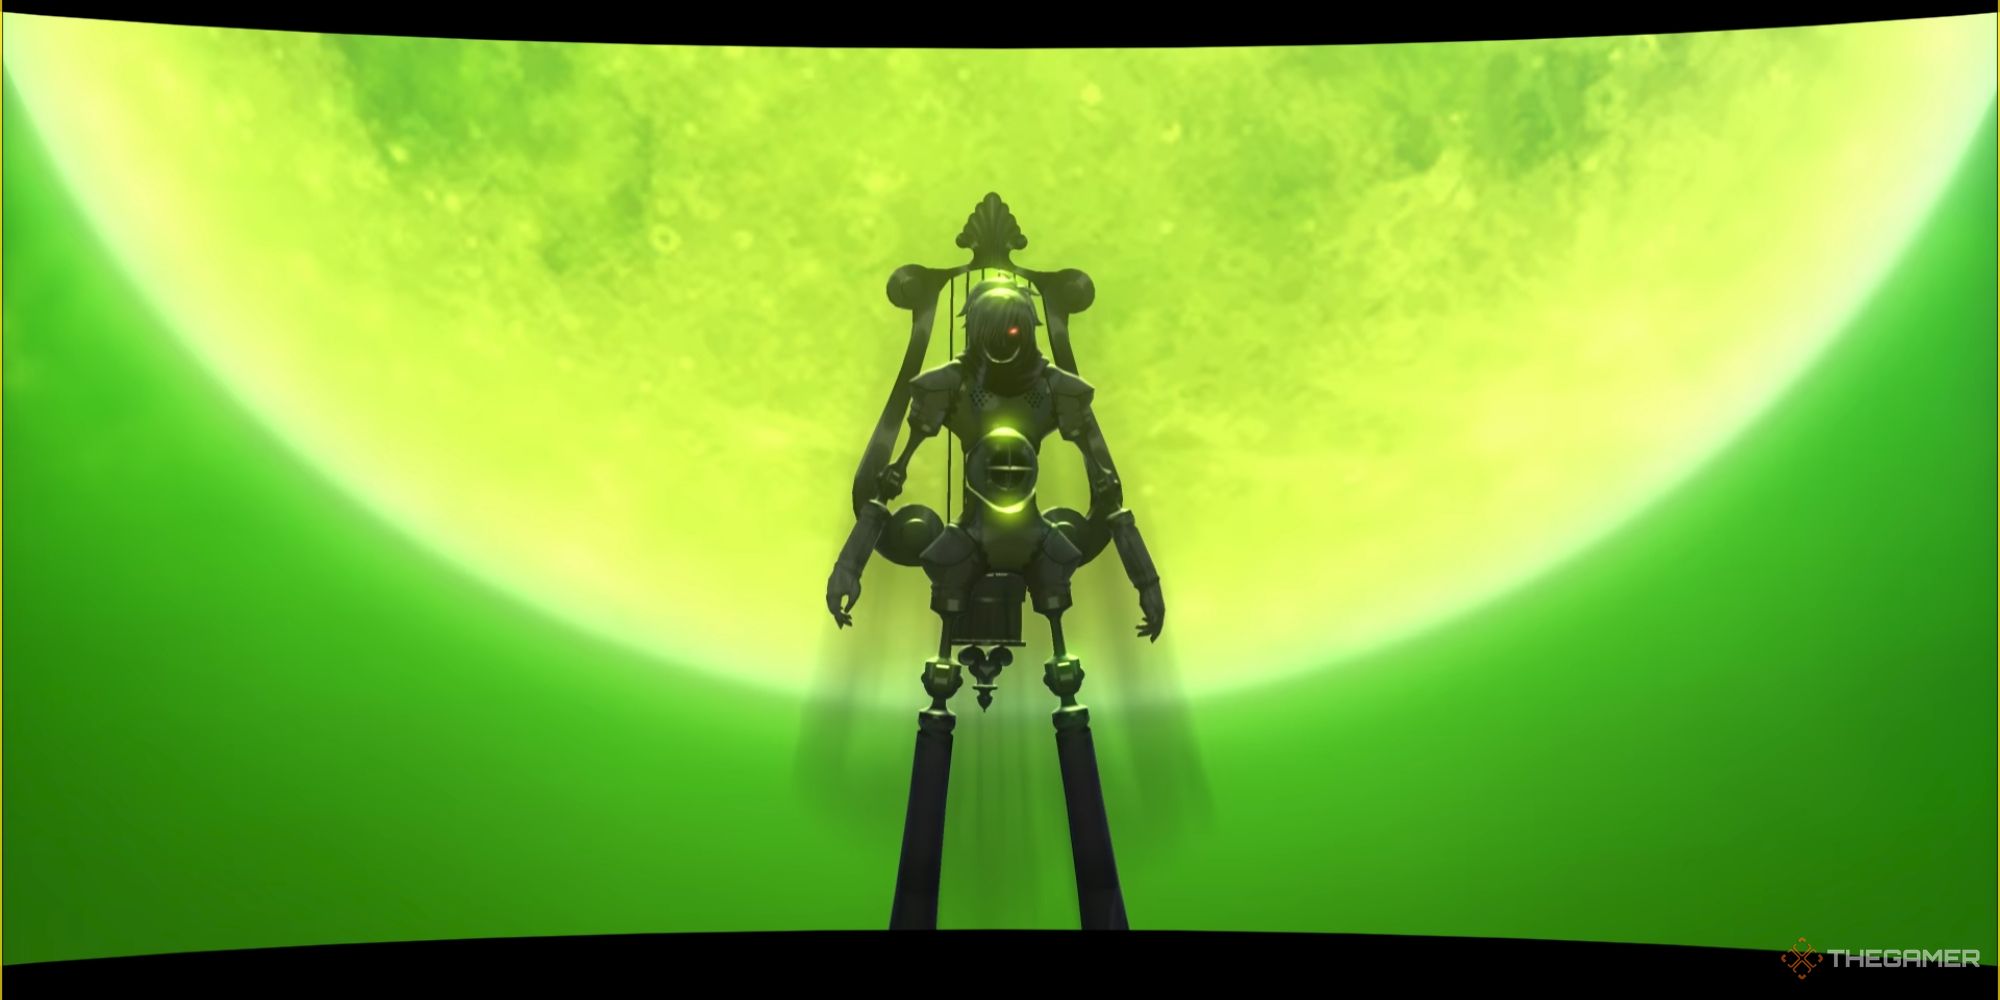 Persona 3 Reload - Orpheus hovers in front of a green full moon during the Dark Hour